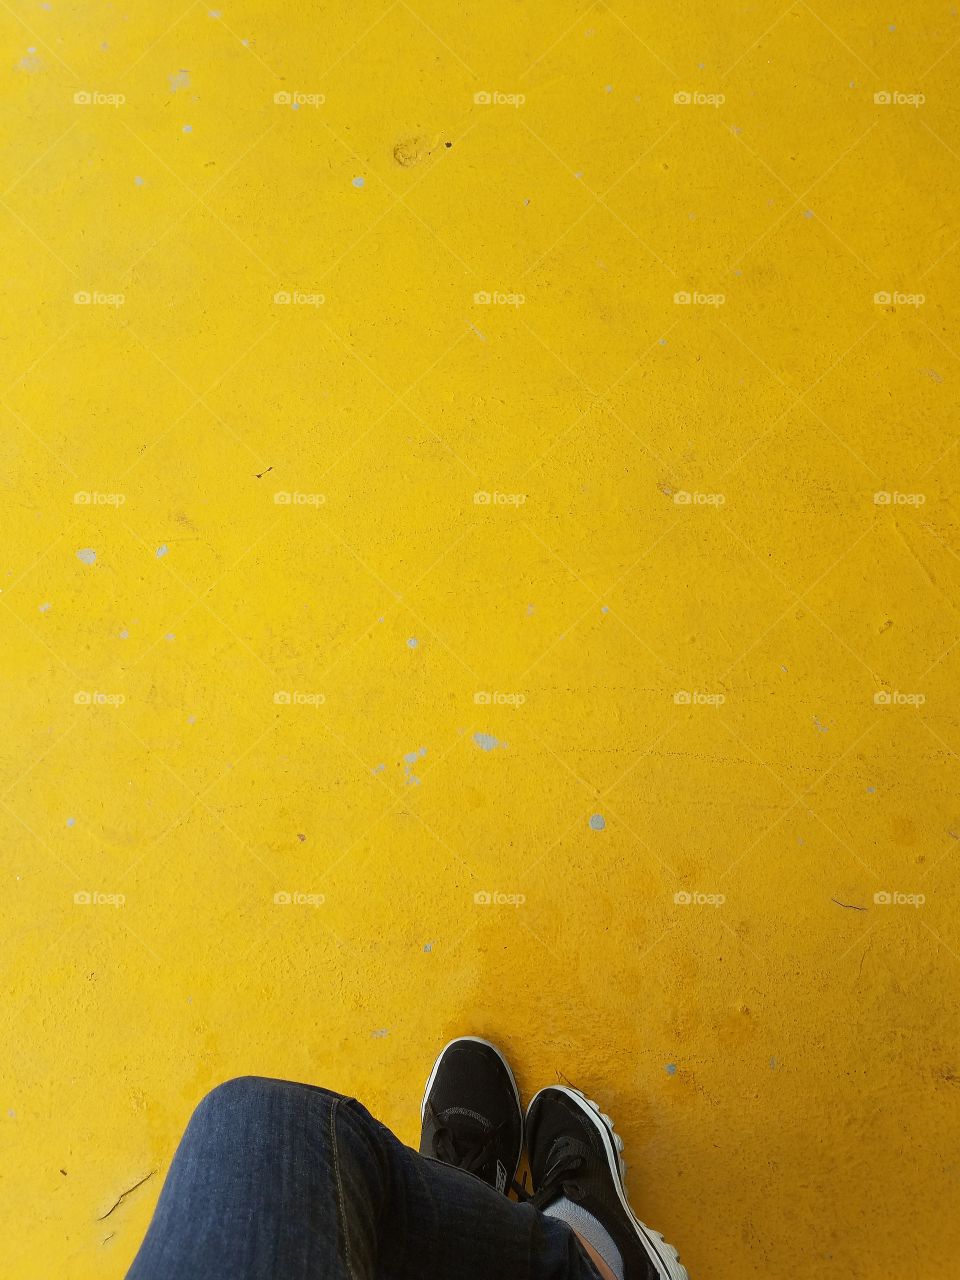 Shoes on Yellow Pavement